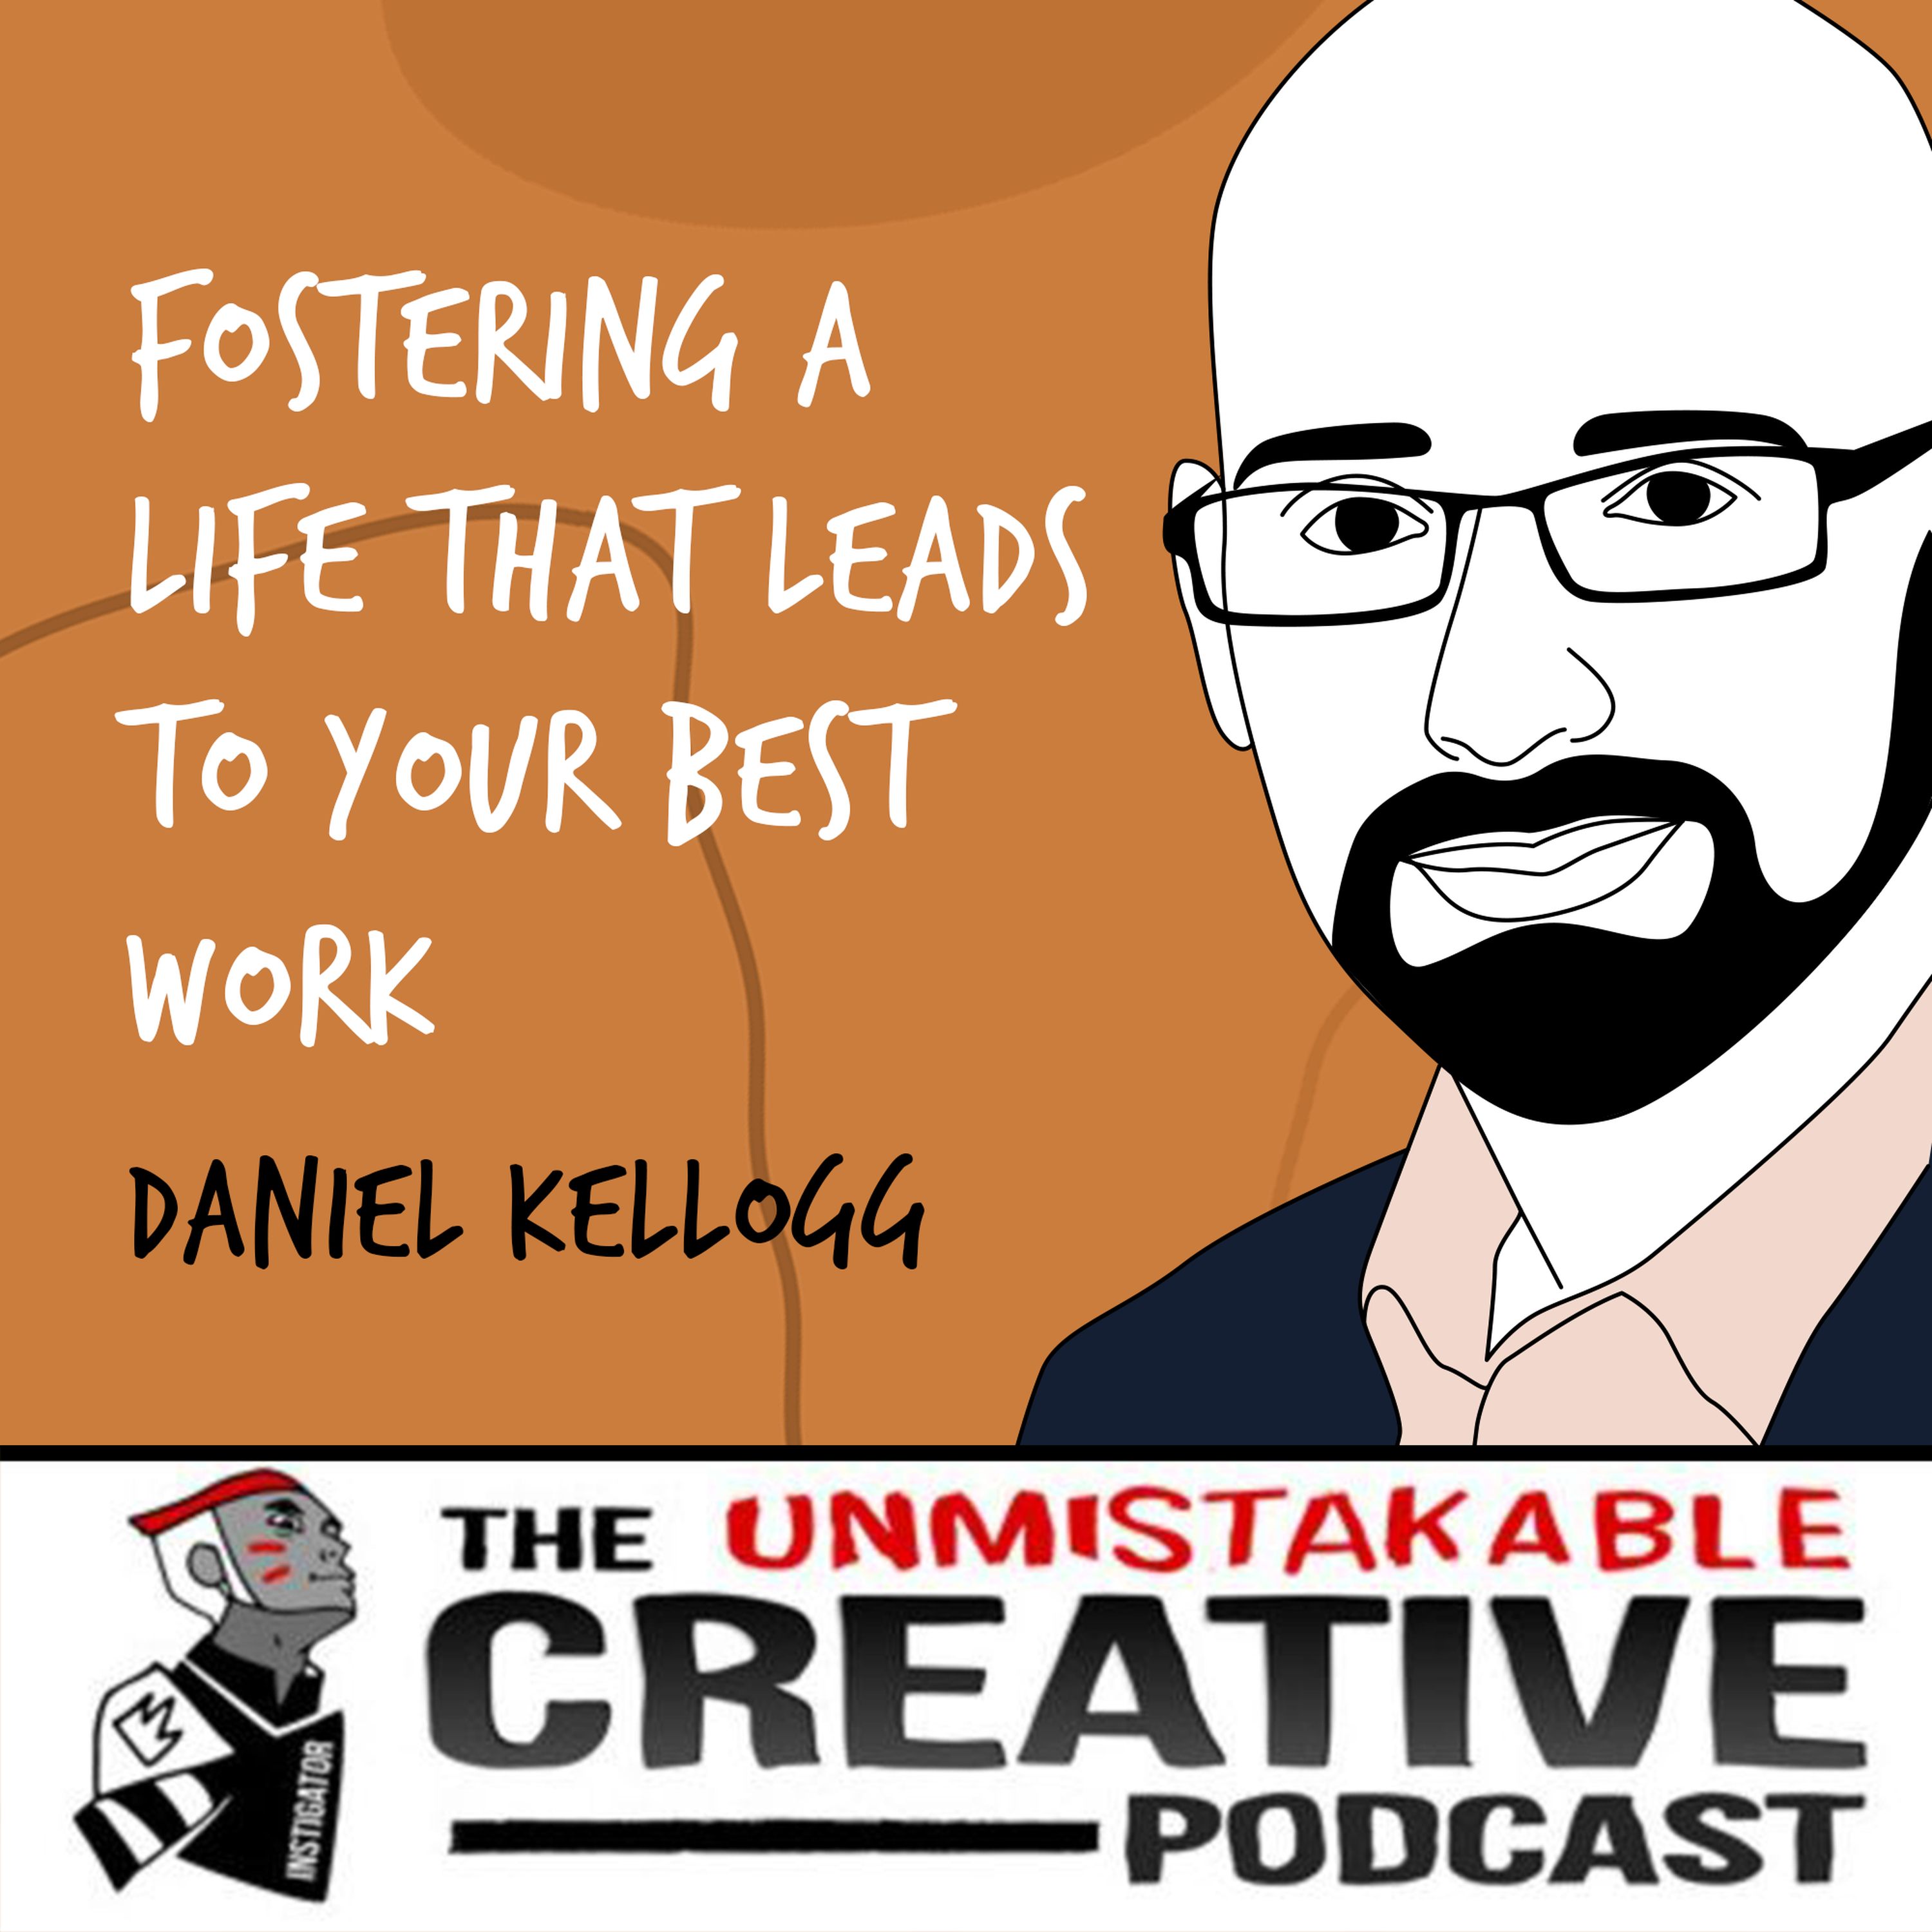 Daniel Kellogg | Fostering a Life That Leads to Your Best Work Image